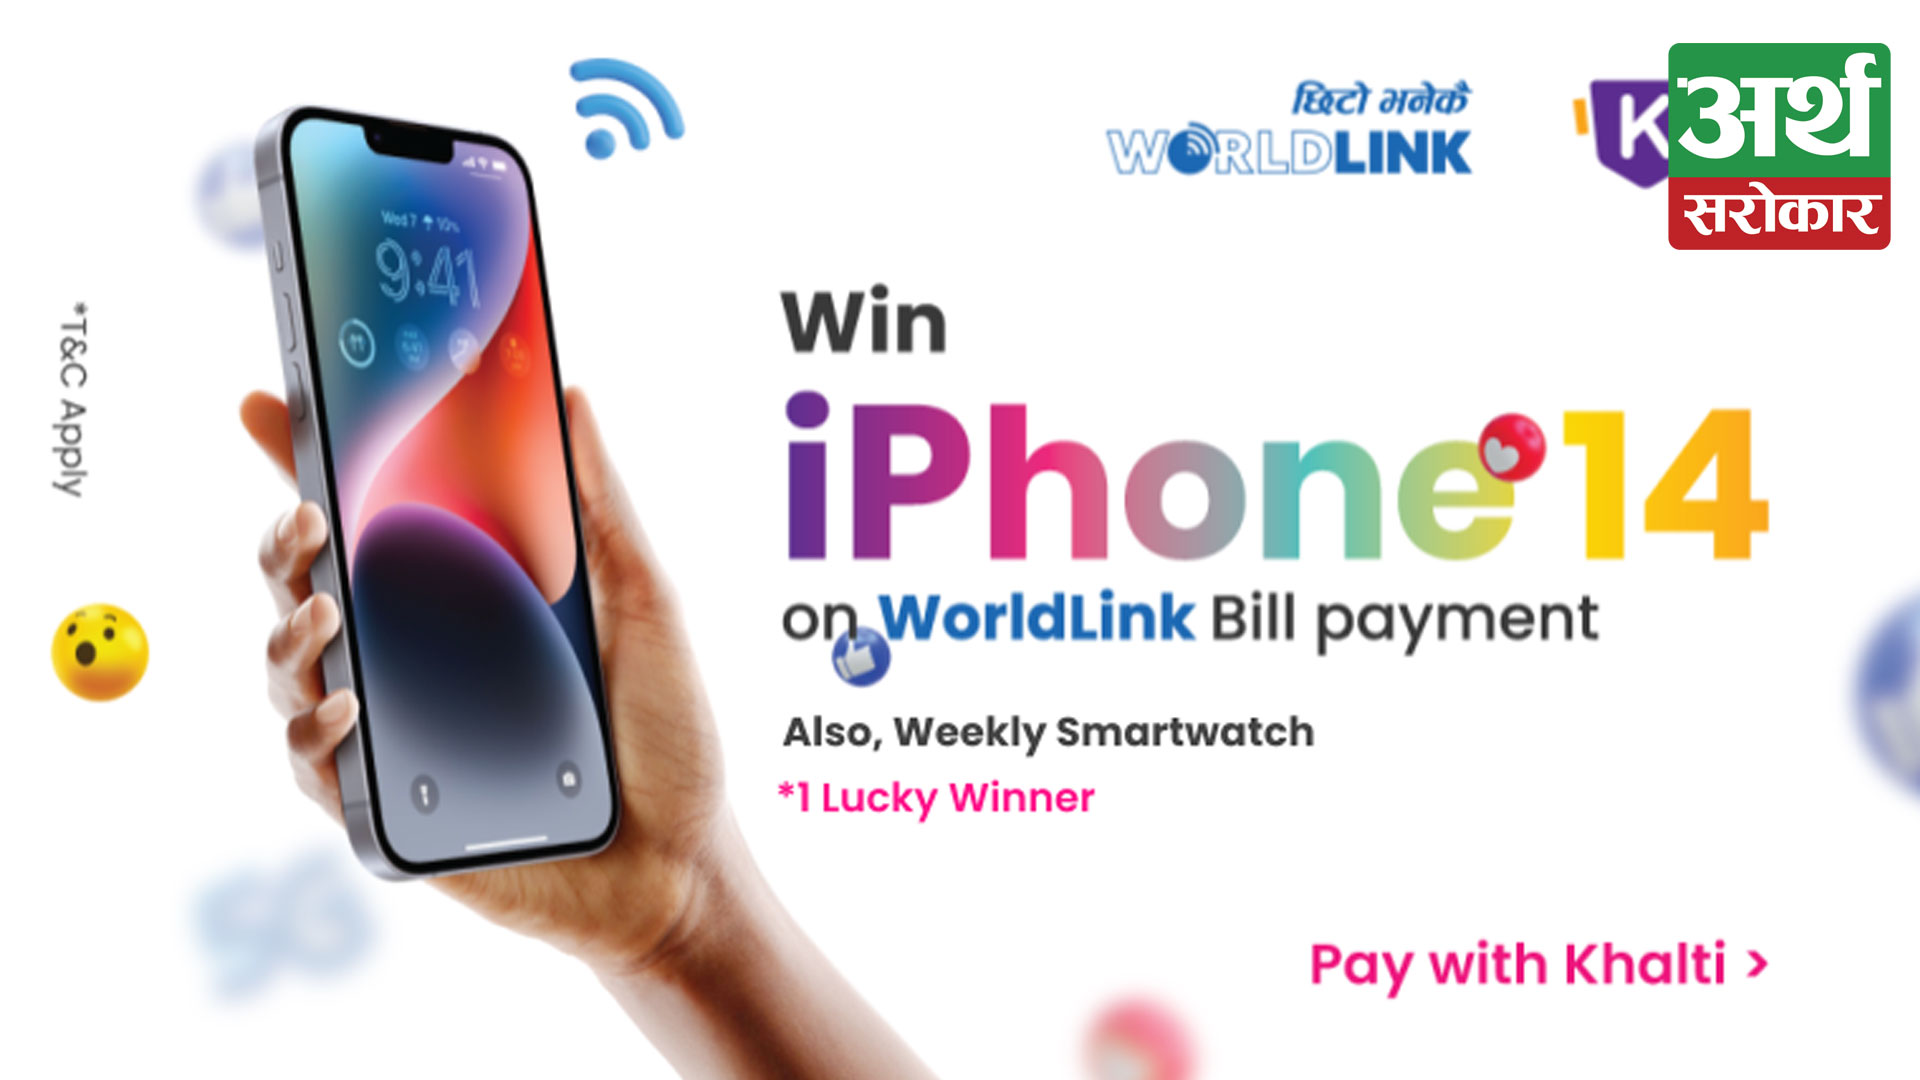 Chance to win iPhone 14 on WorldLink Payment from Khalti in addition to VAT Refund and other Exciting Giveaways